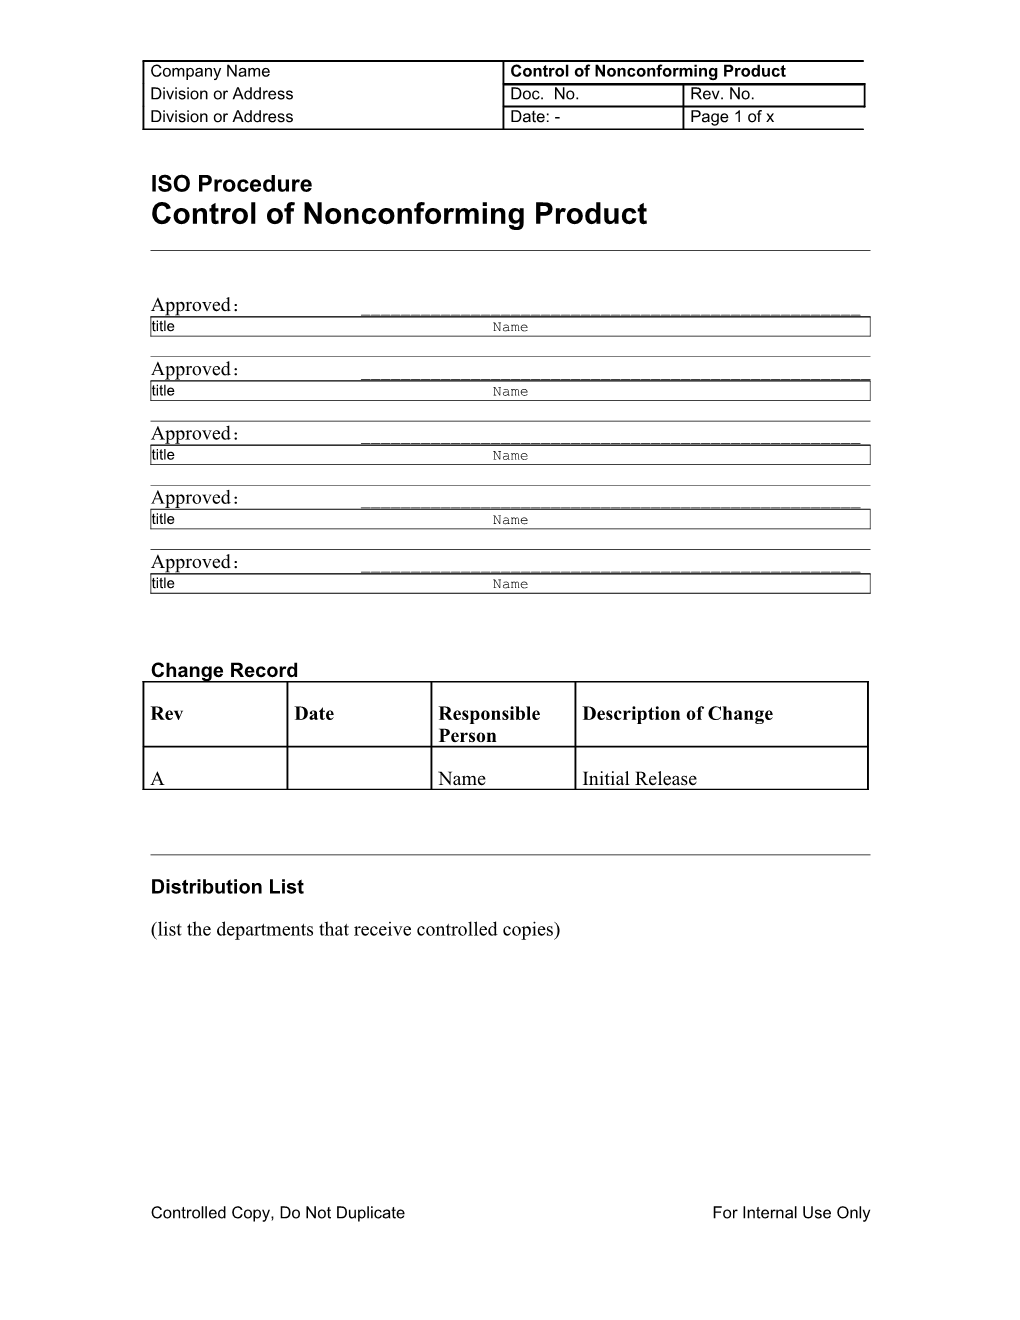 Control of Nonconforming Product